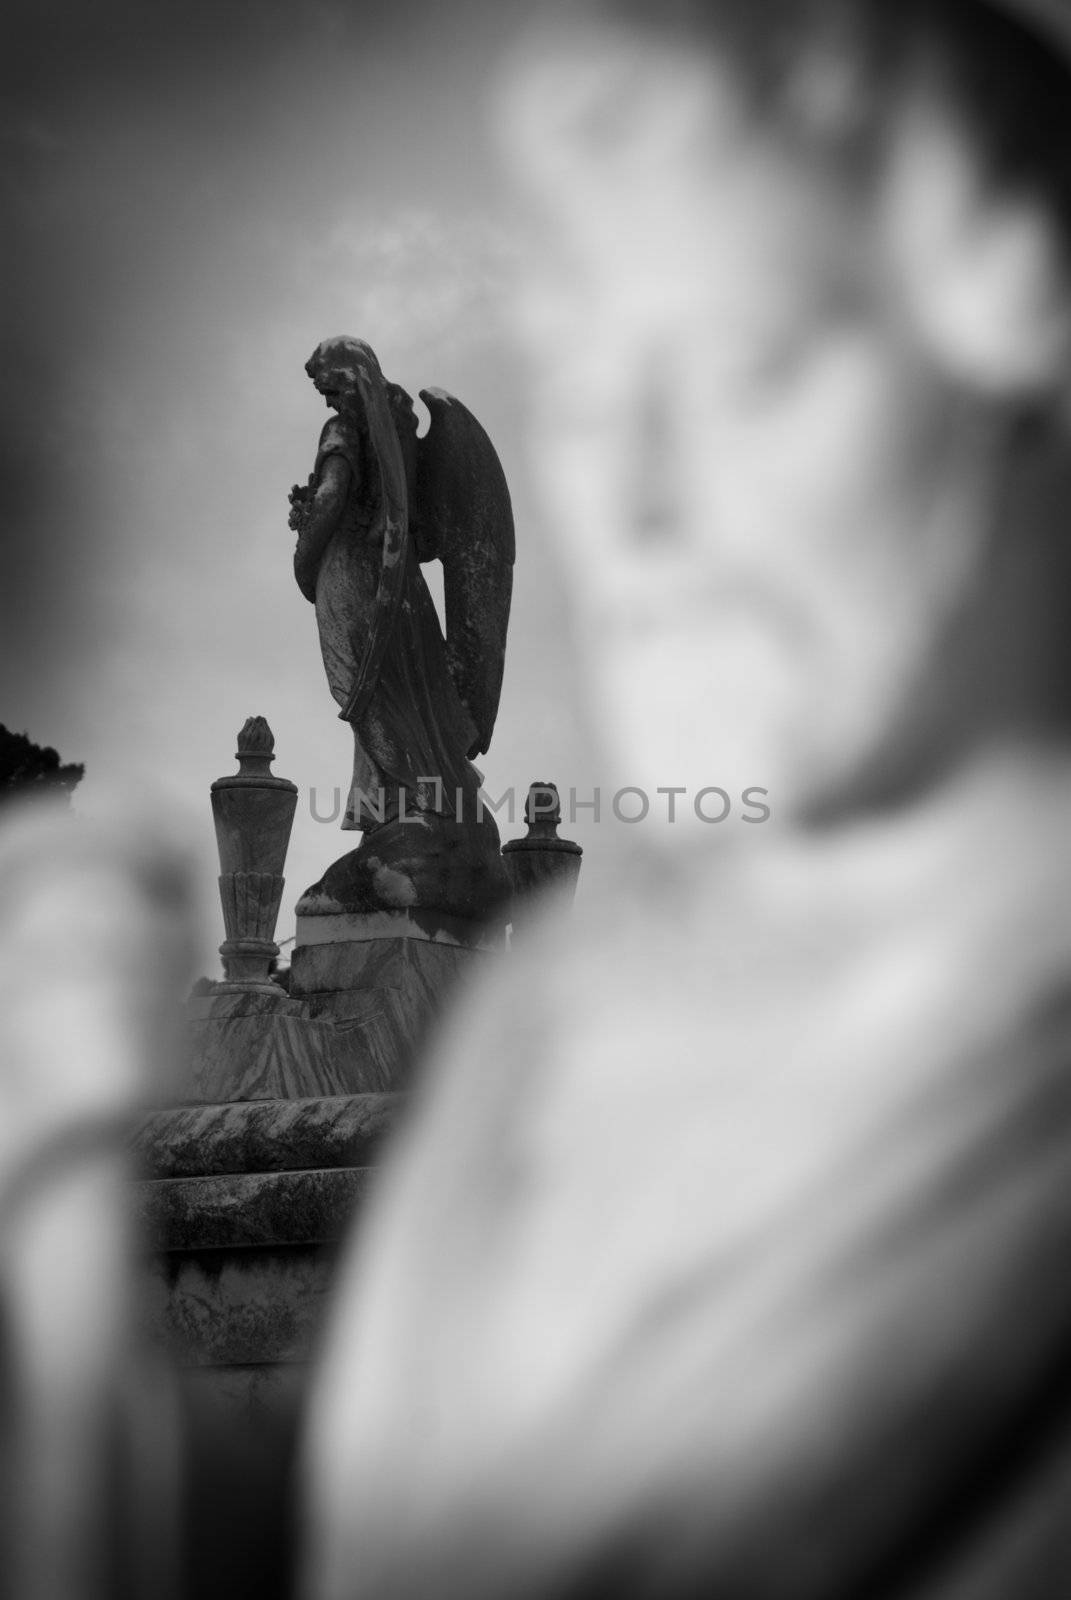 Black and White selective focus image of an angel adorning an above ground tomb with the statue of a man in the foreground.